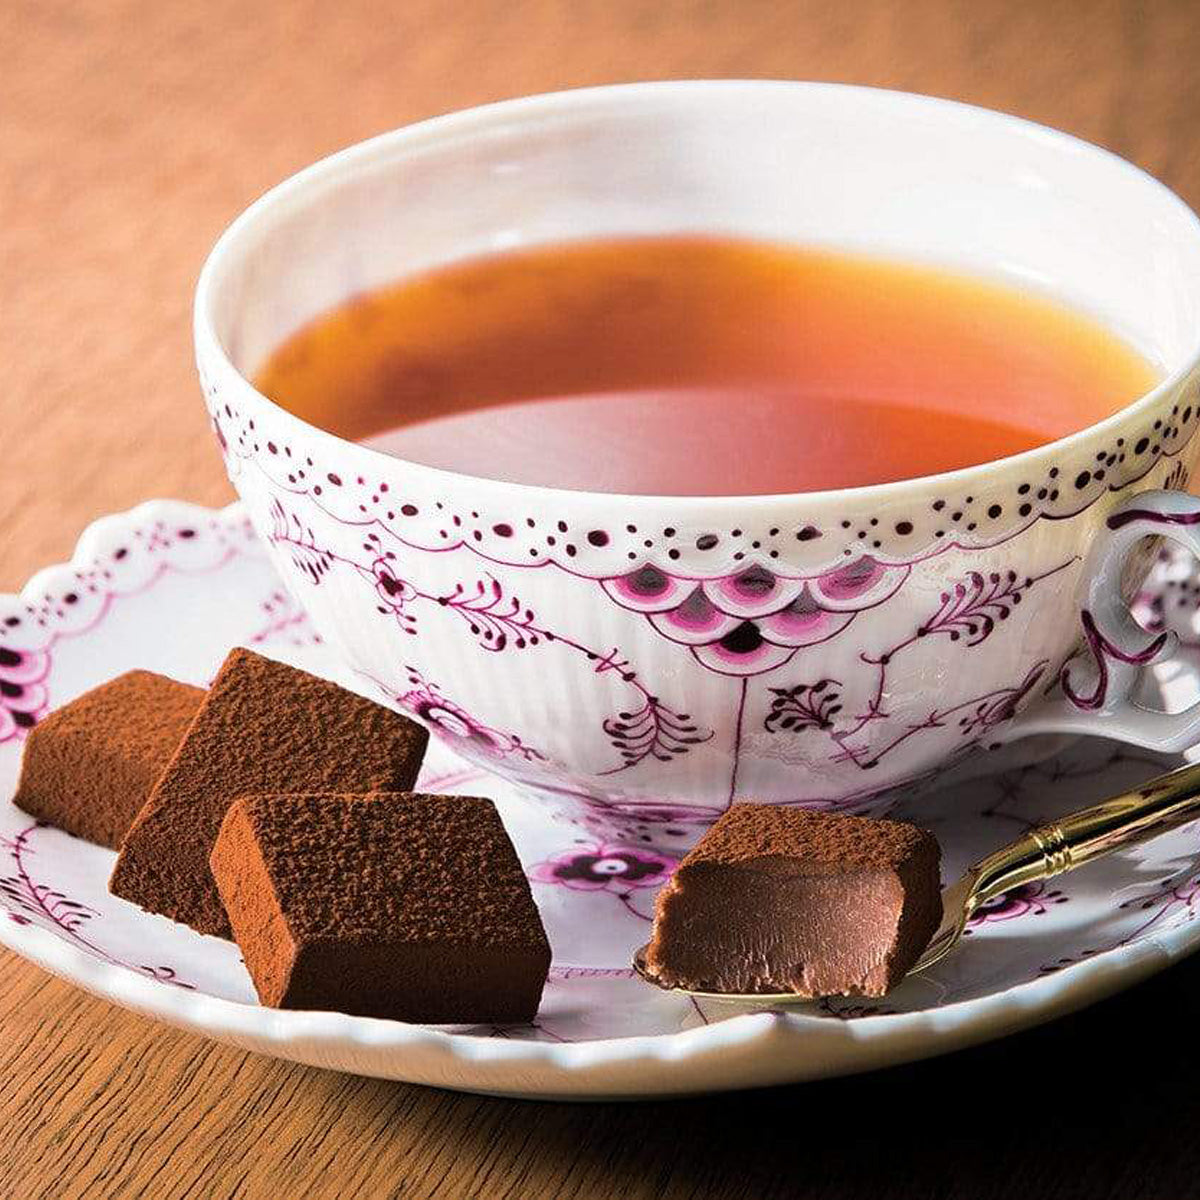 ROYCE' Chocolate - Nama Chocolate "Darjeeling" - Image shows brown blocks of chocolate on a a white plate with pink floral prints. Accents include a white tea cup with pink floral prints filled with amber-hued tea and a brown wooden background.